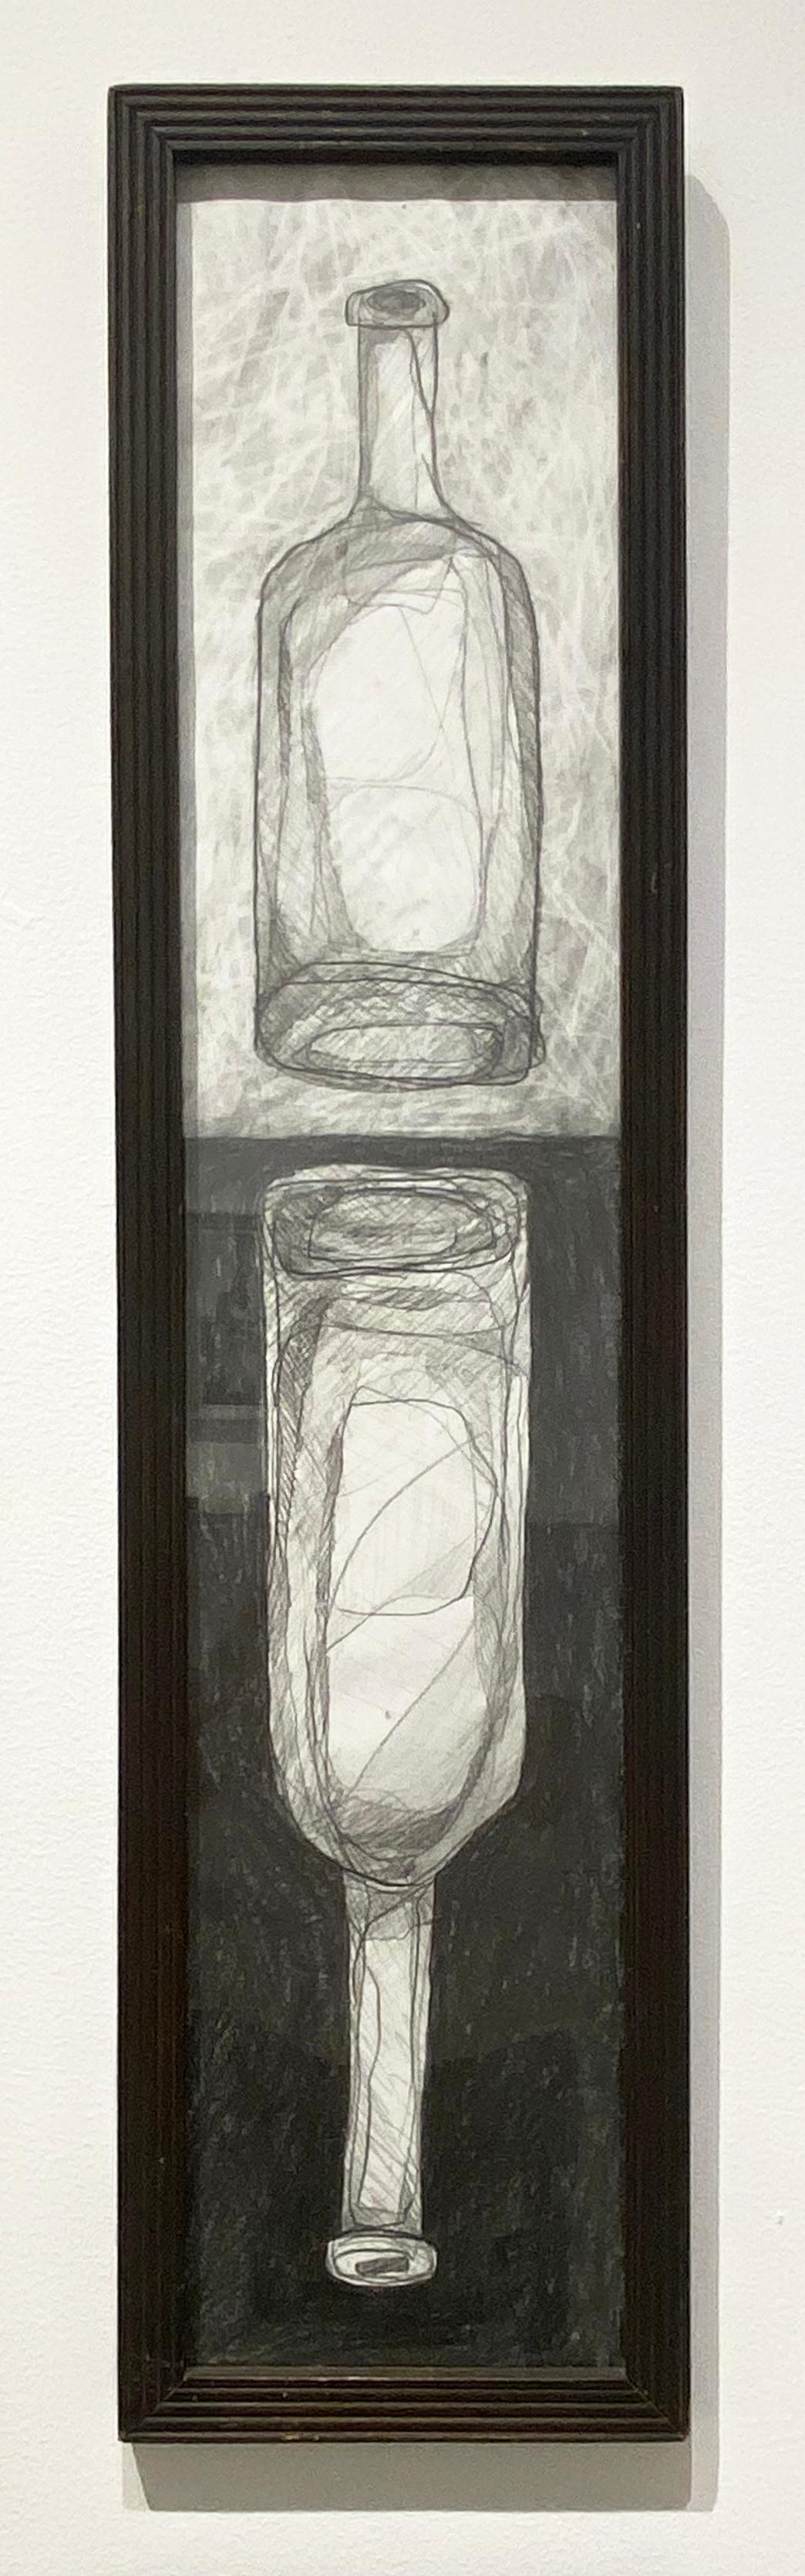 David Dew Bruner Abstract Drawing - Morandi 22 (Contemporary Abstracted Still life drawing in Vintage Frame)